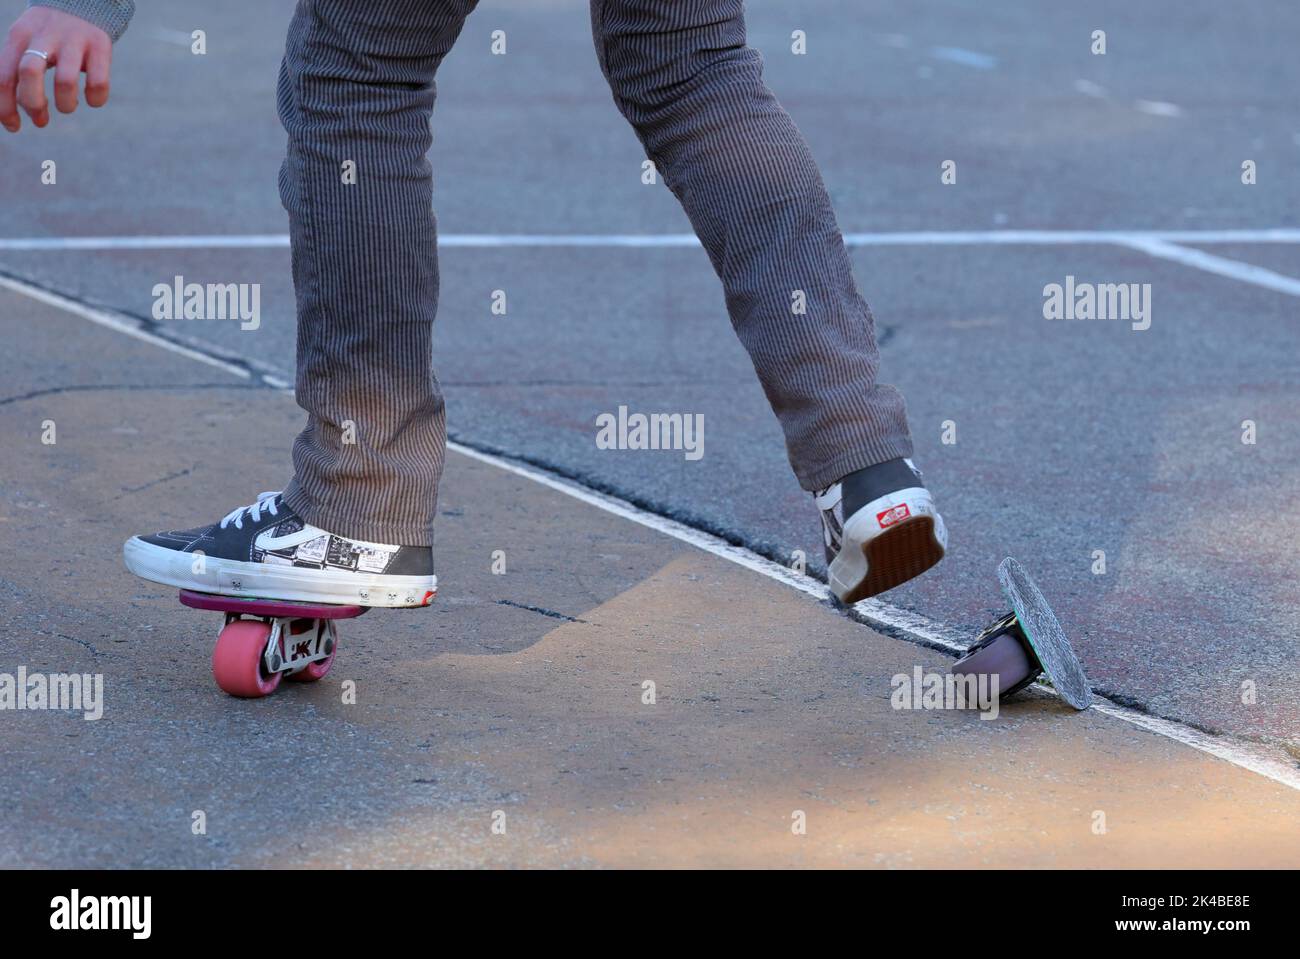 A person with freeline drift skates freeskating on an asphalt playground and falling off a skate Stock Photo